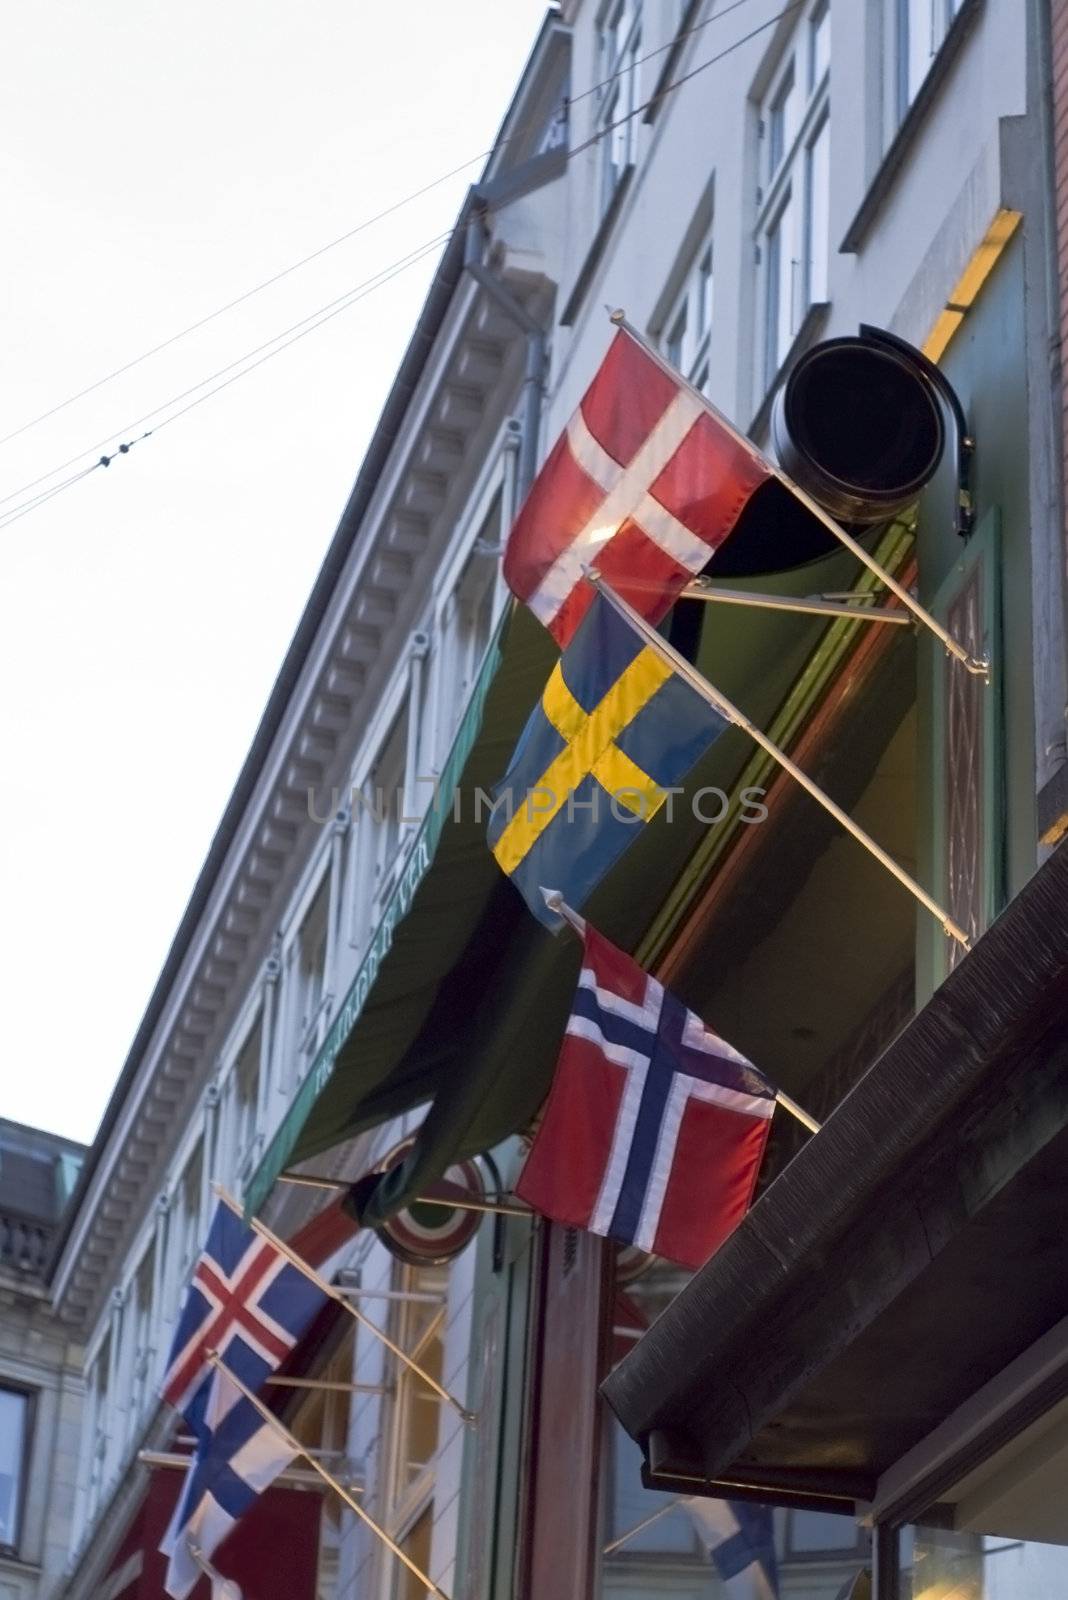 Danish and Swedish flags by photo4dreams